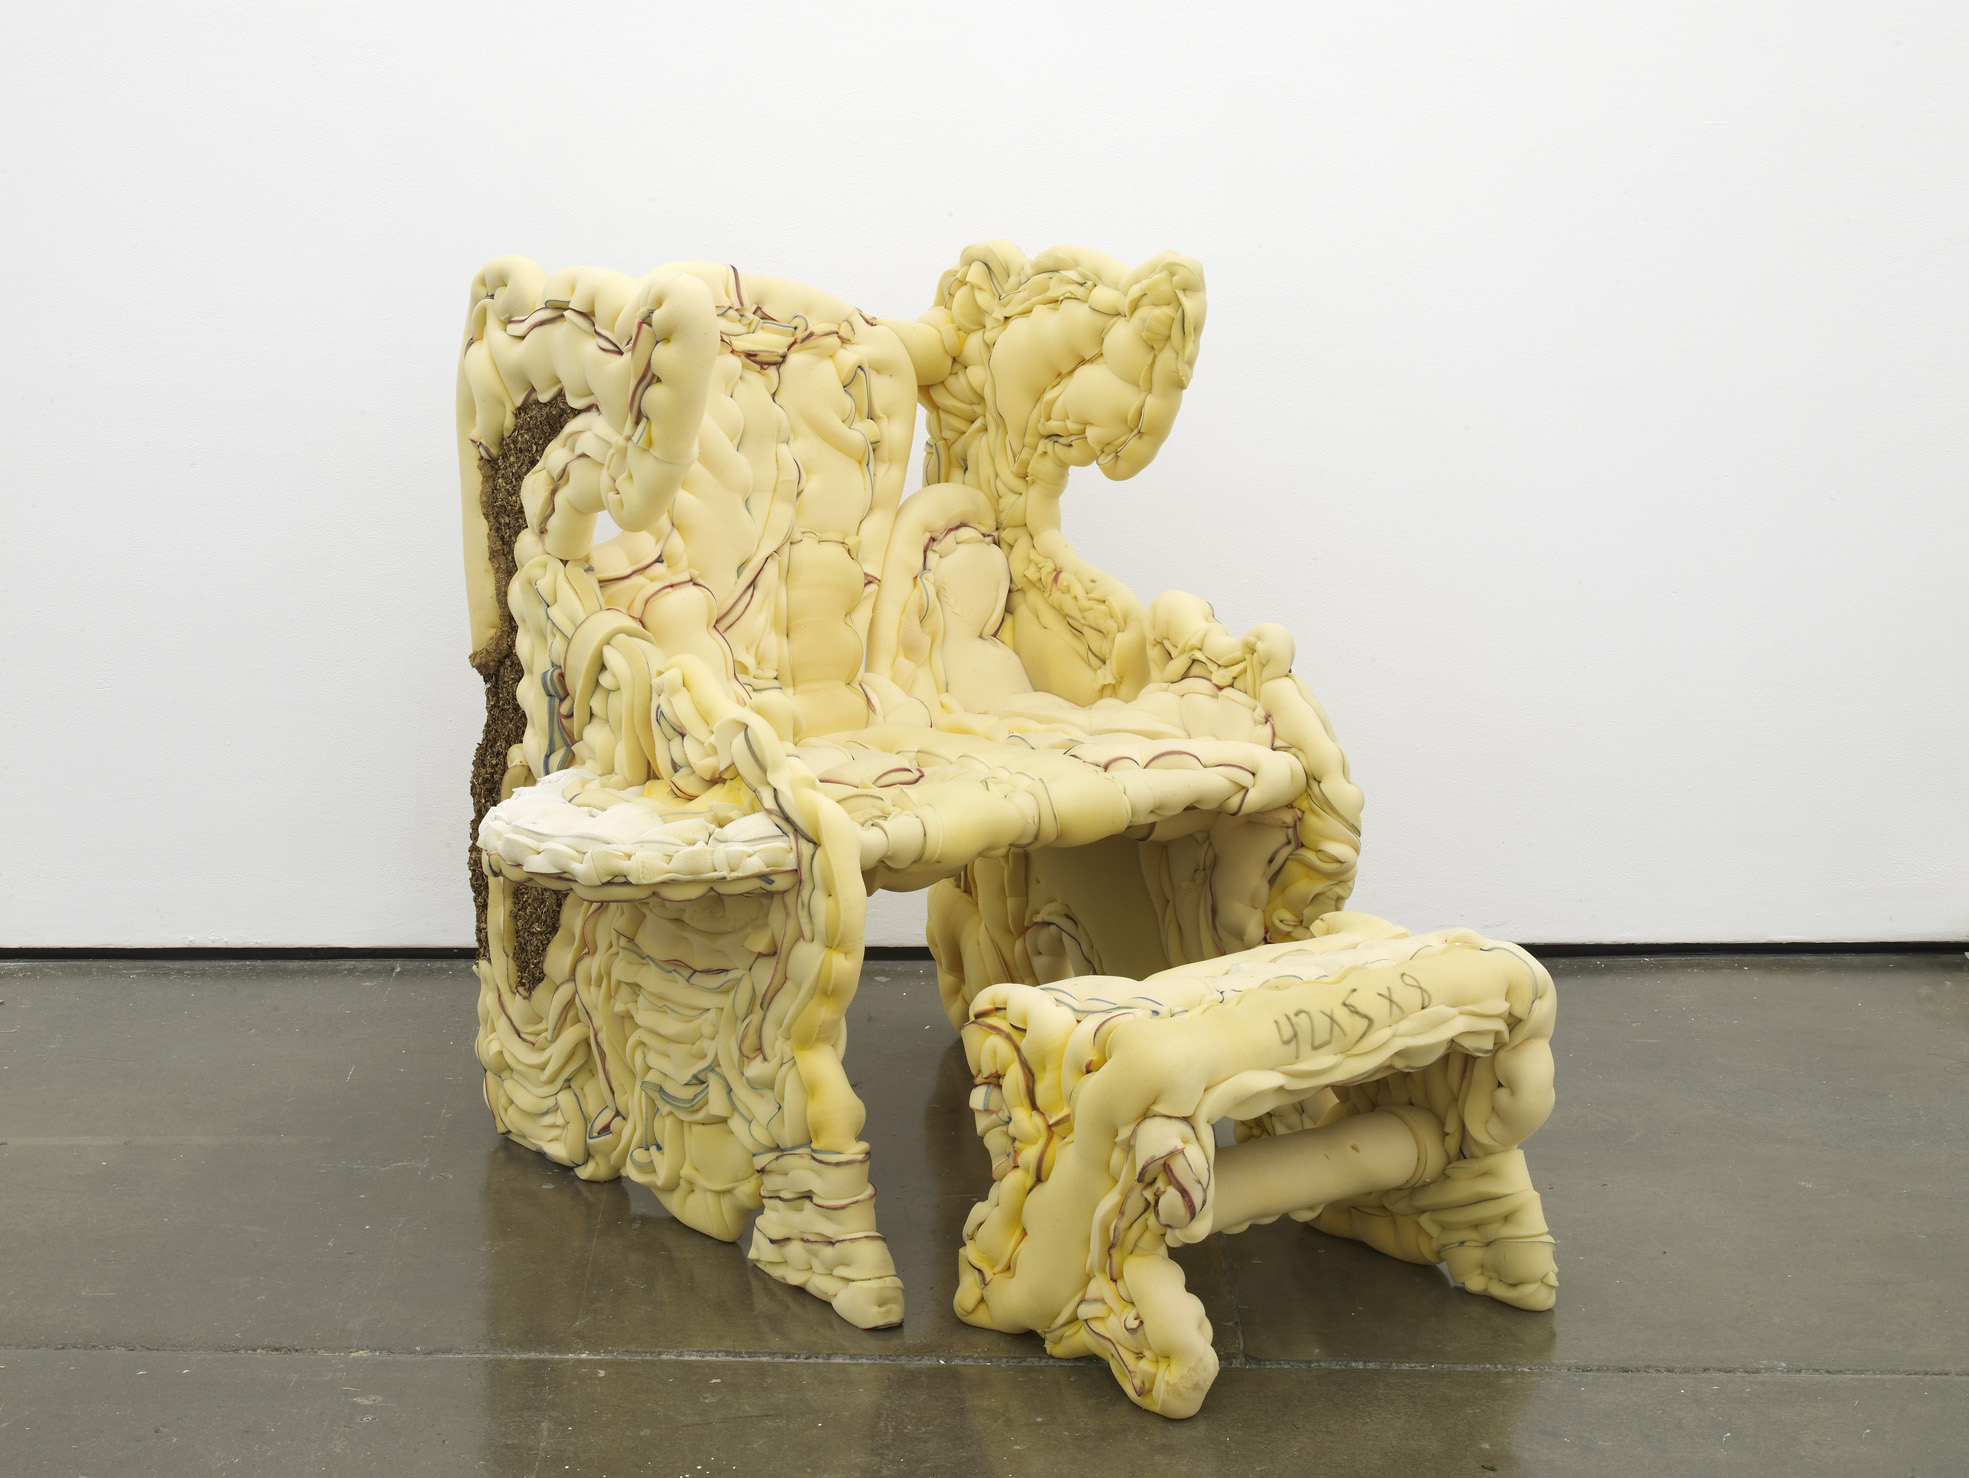     Jessi Reaves You’re There Again Armchair 2015 Plywood, polyurethane foam, sawdust, hardware, ink 109.2 x 101.6 x 78.7 cm / 43 x 40 x 31 in HS12-JR5451S 